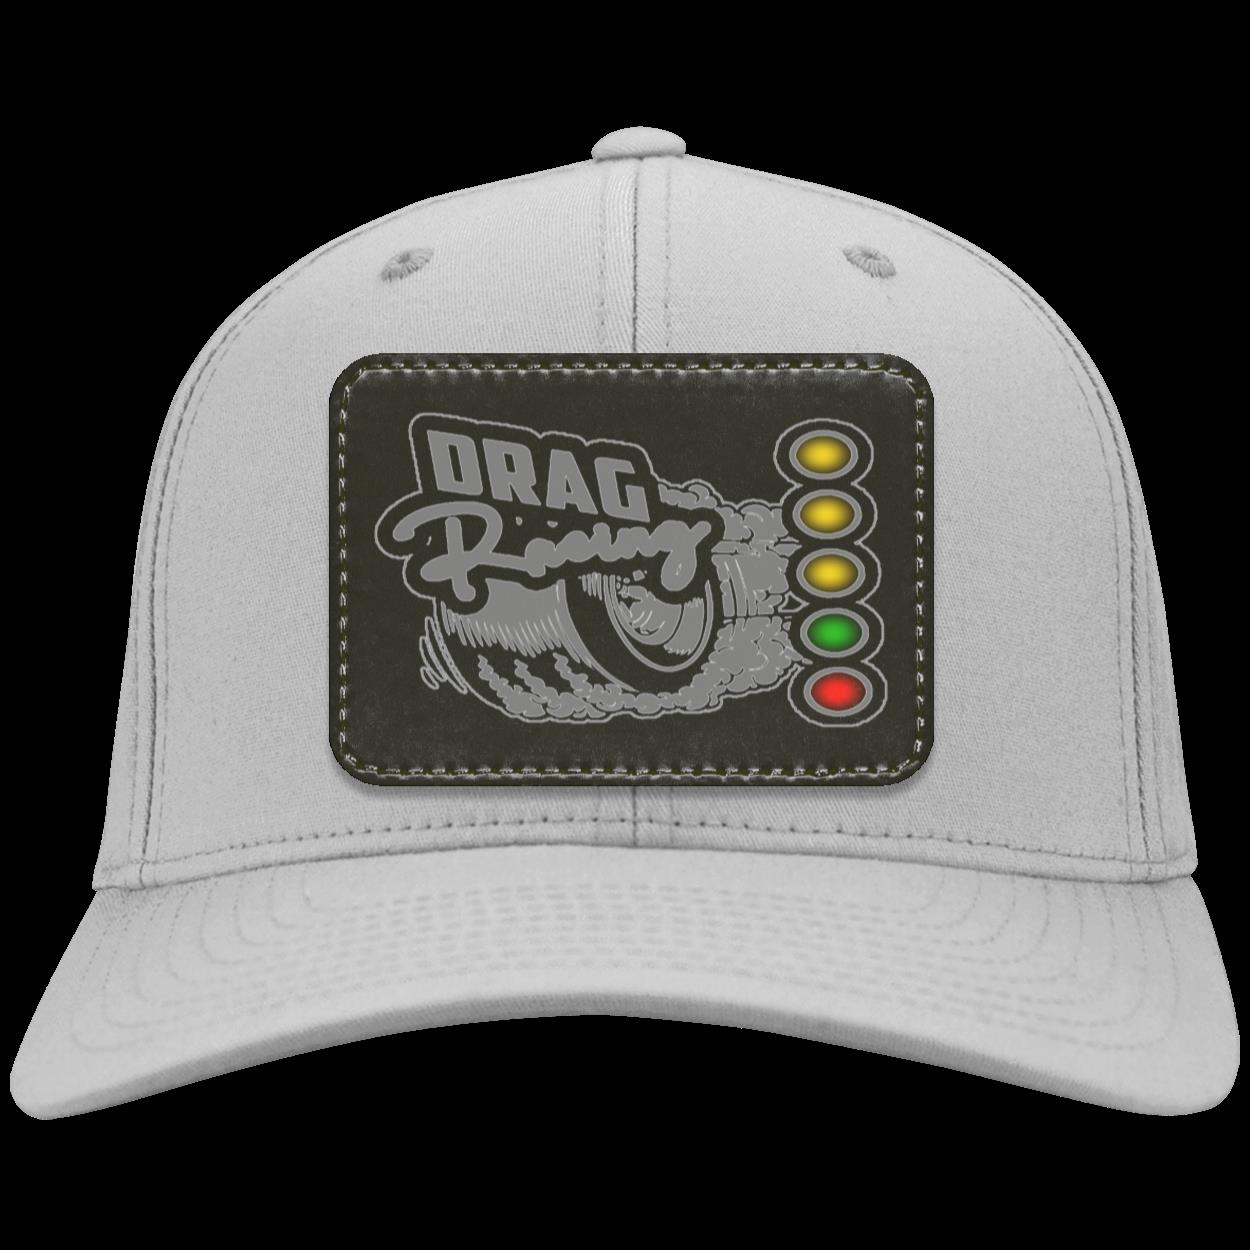 Drag Racing Patched Twill Cap V11